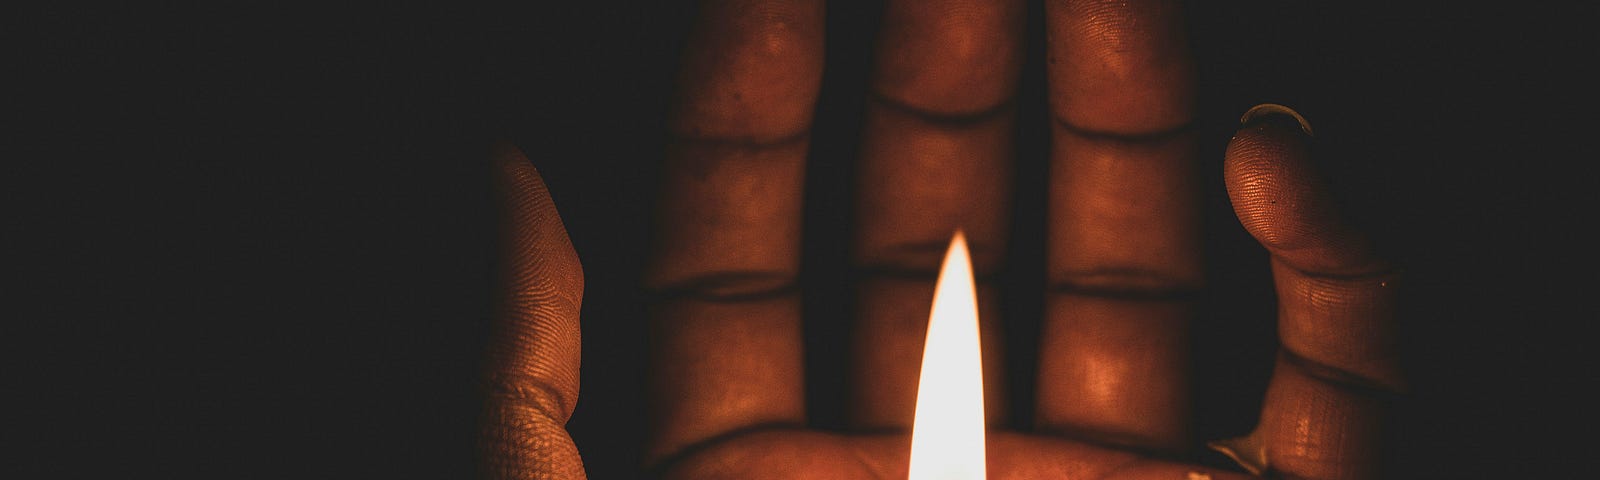 A cupped hand holding a lit candle in the dark